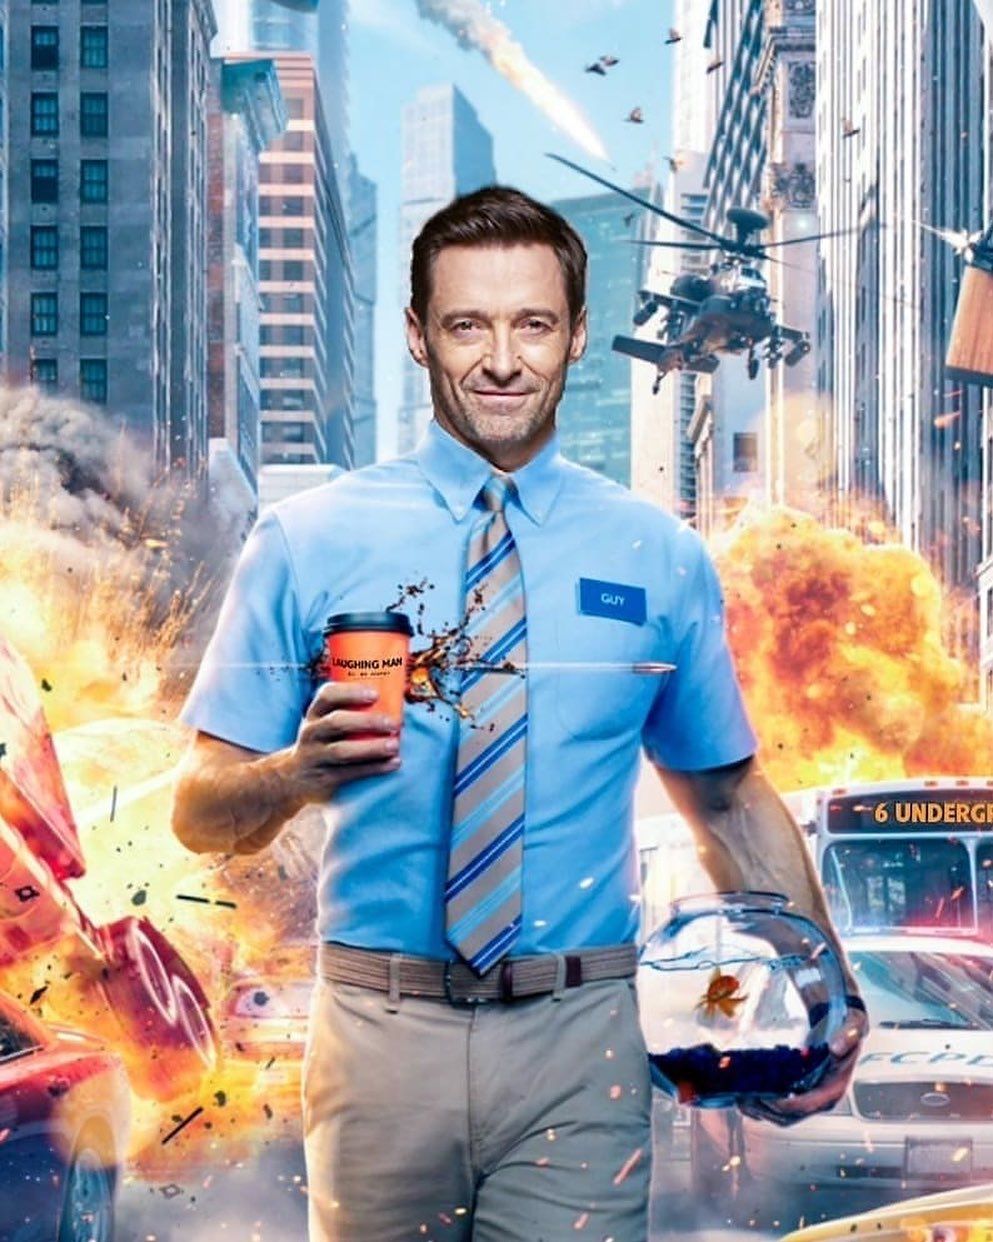 Hugh Jackman's small edit to make the Free Guy poster better